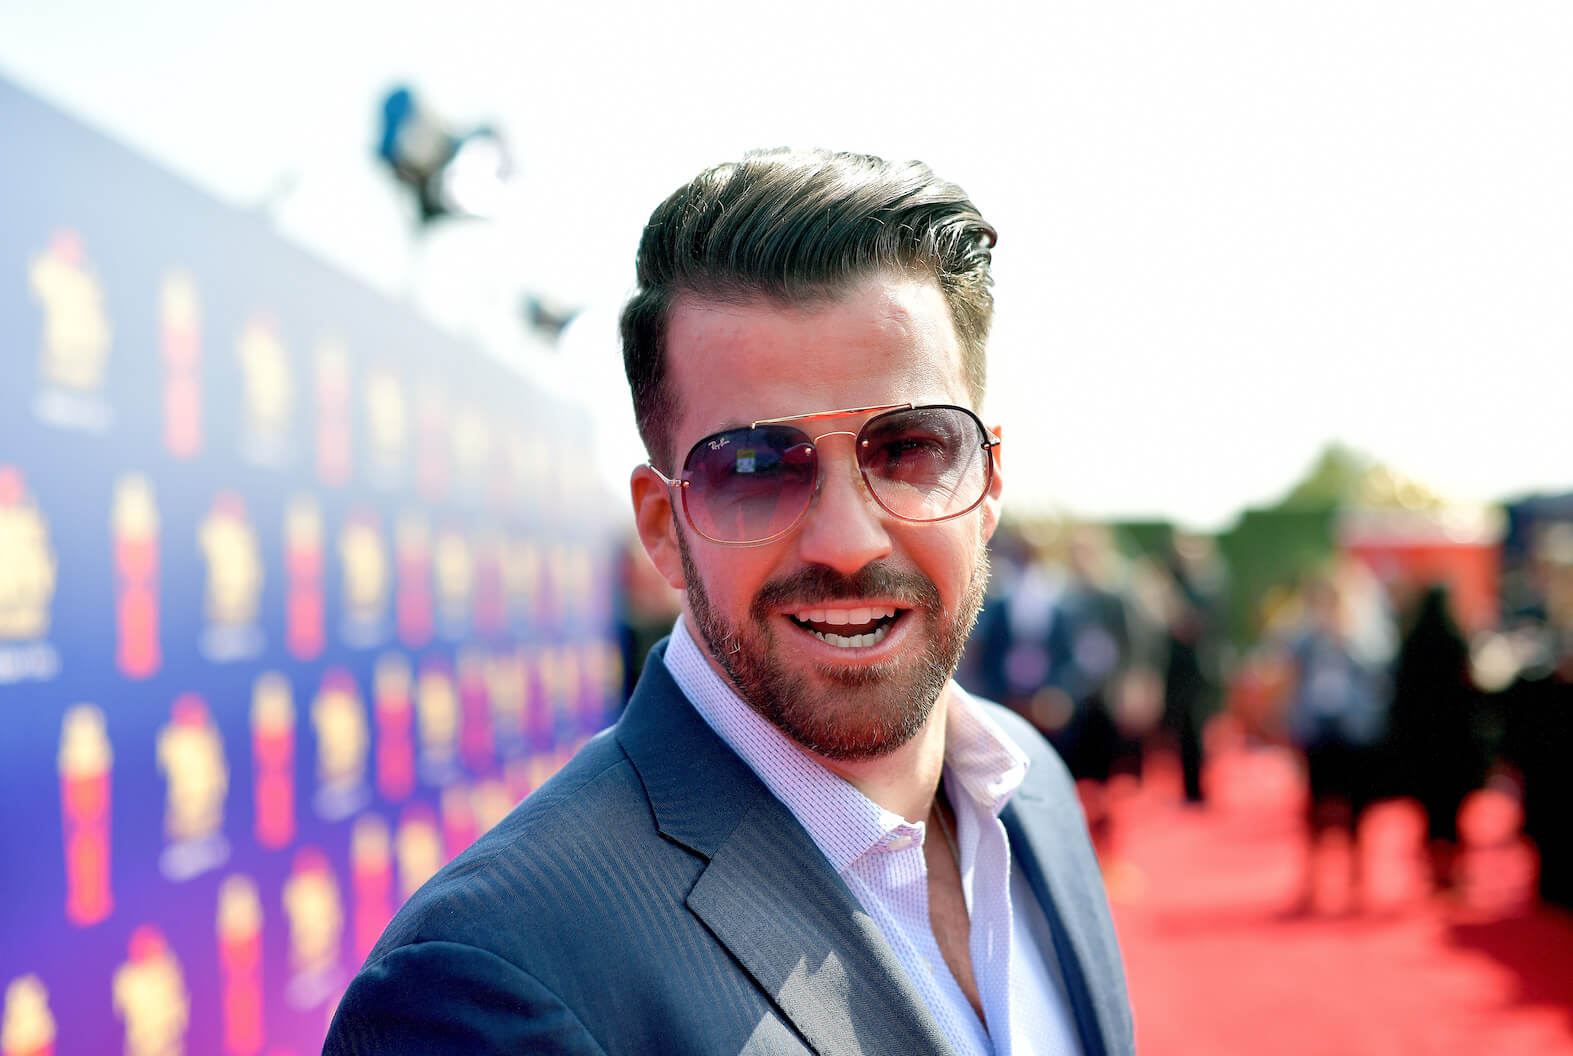 A close-up of Johnny 'Bananas' Devenanzio from MTV's 'The Challenge' wearing a suit on the red carpet